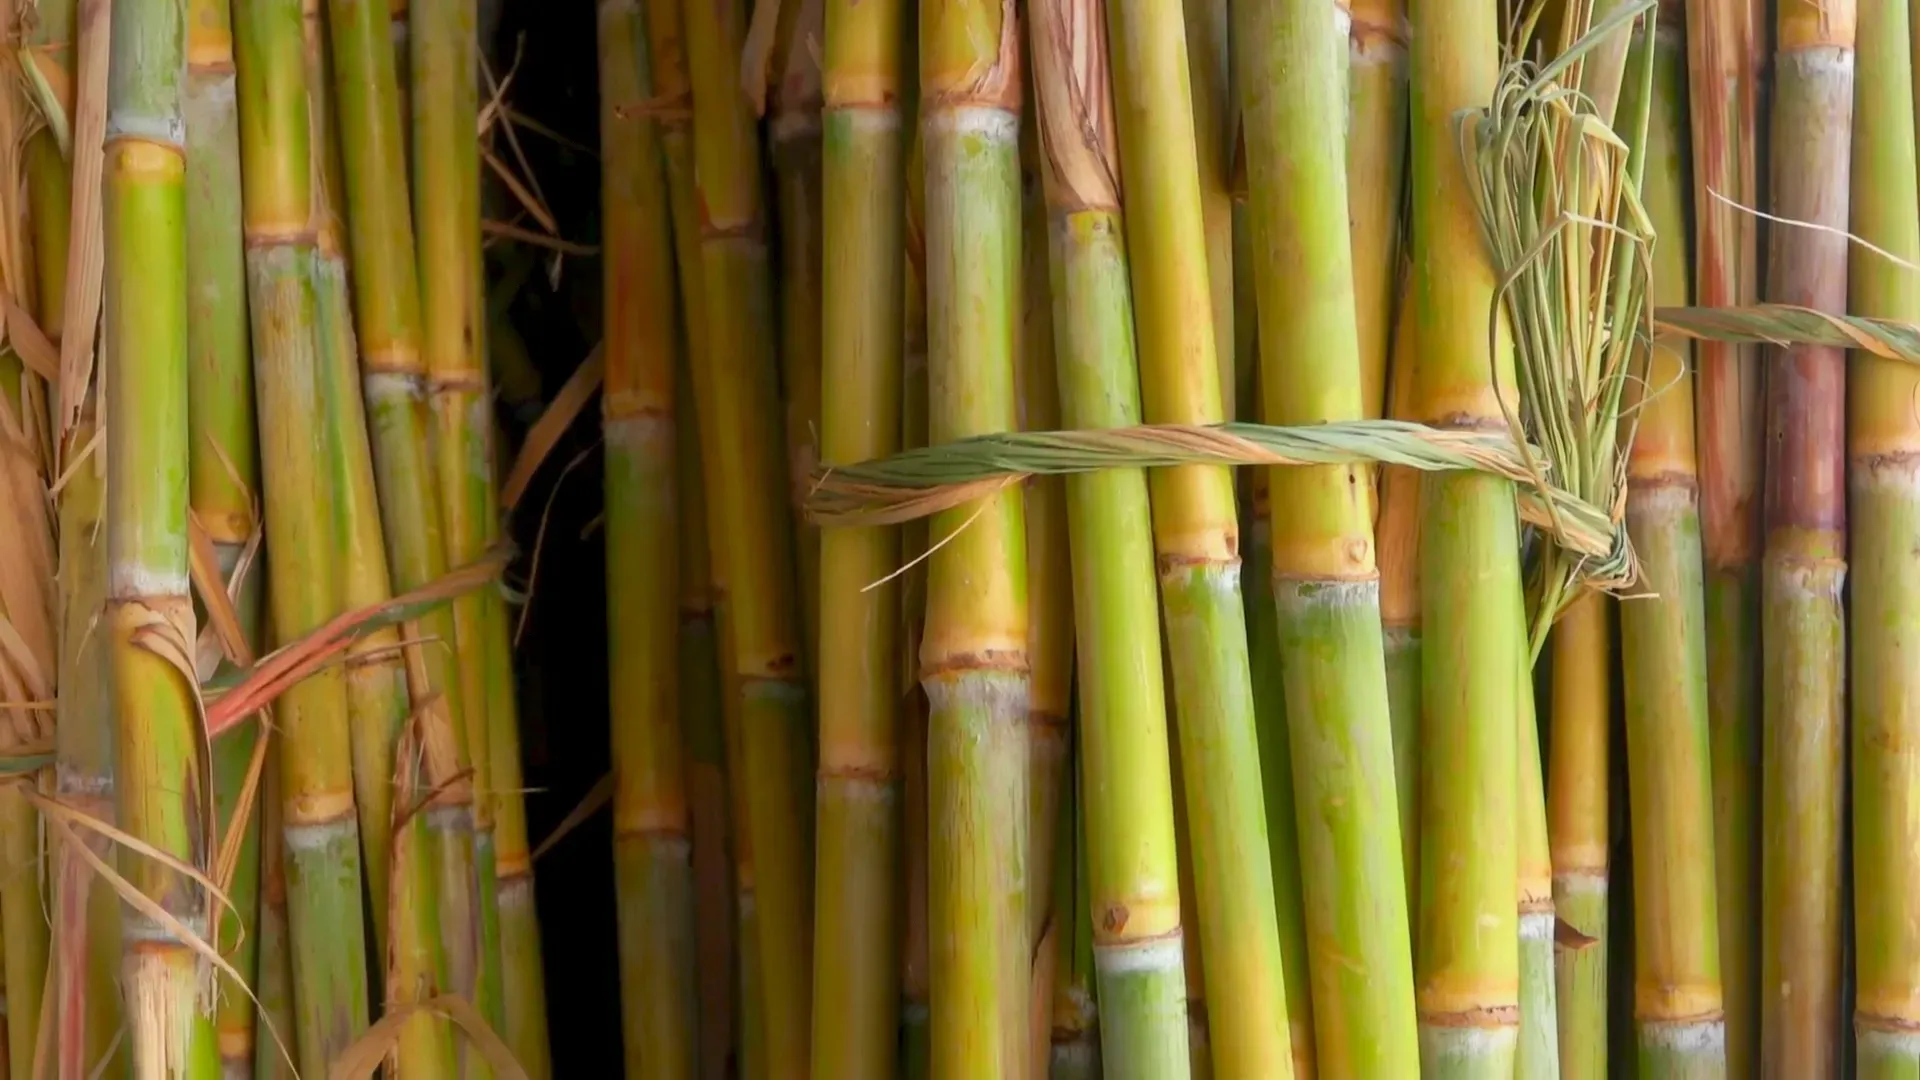 Large quantities of sugar cane are tied together in bundles